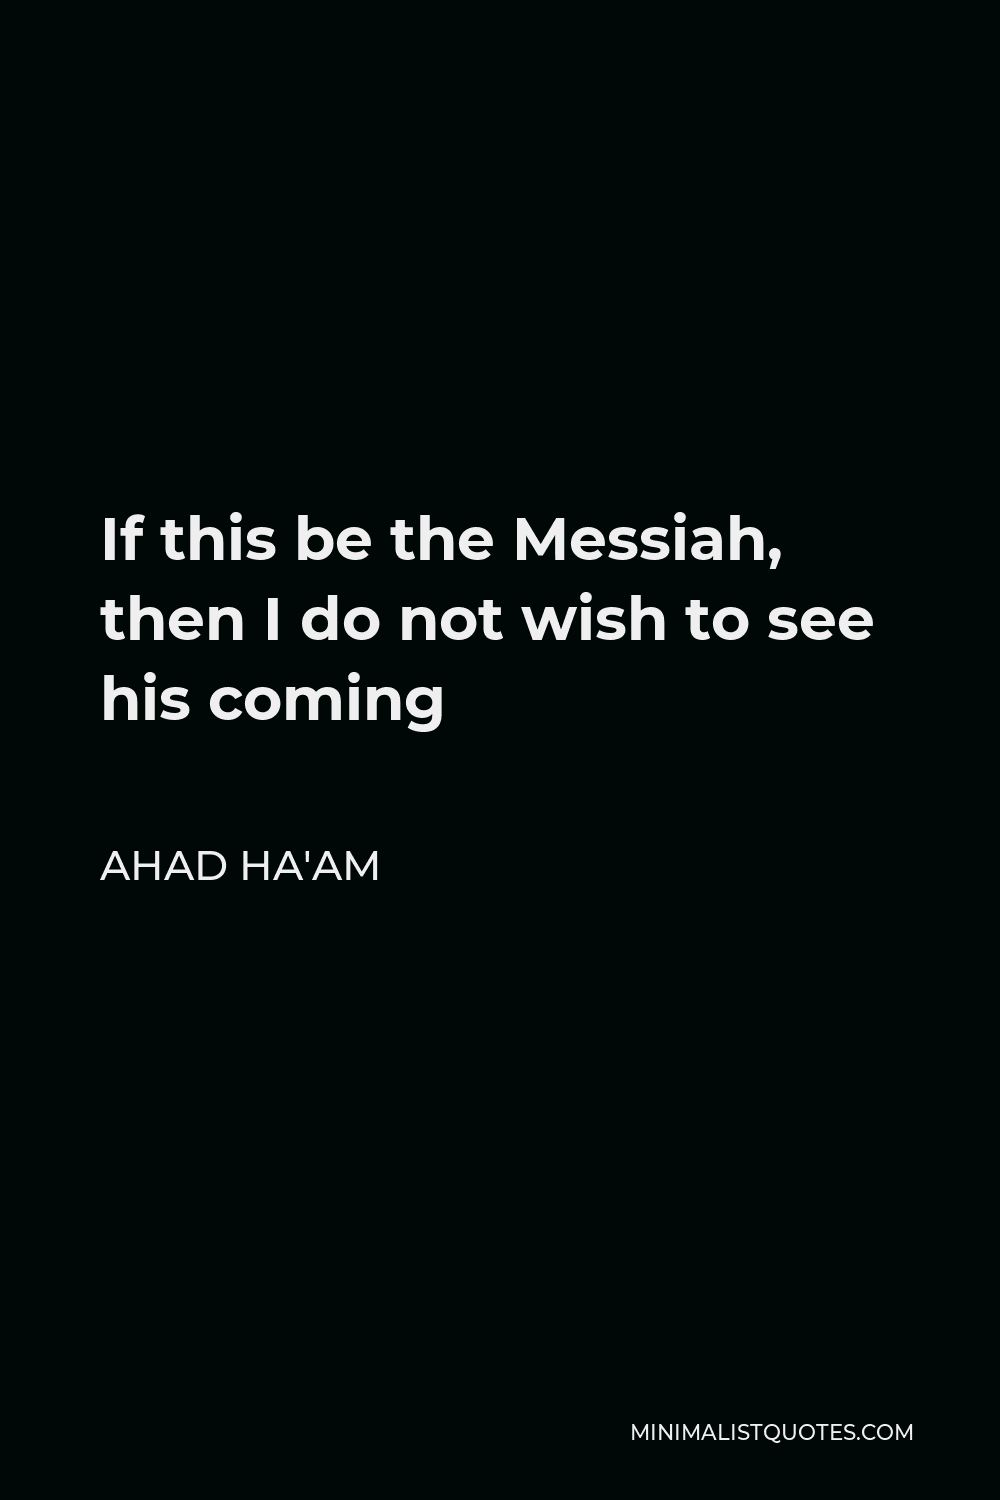 Ahad Ha'am Quote - If this be the Messiah, then I do not wish to see his coming